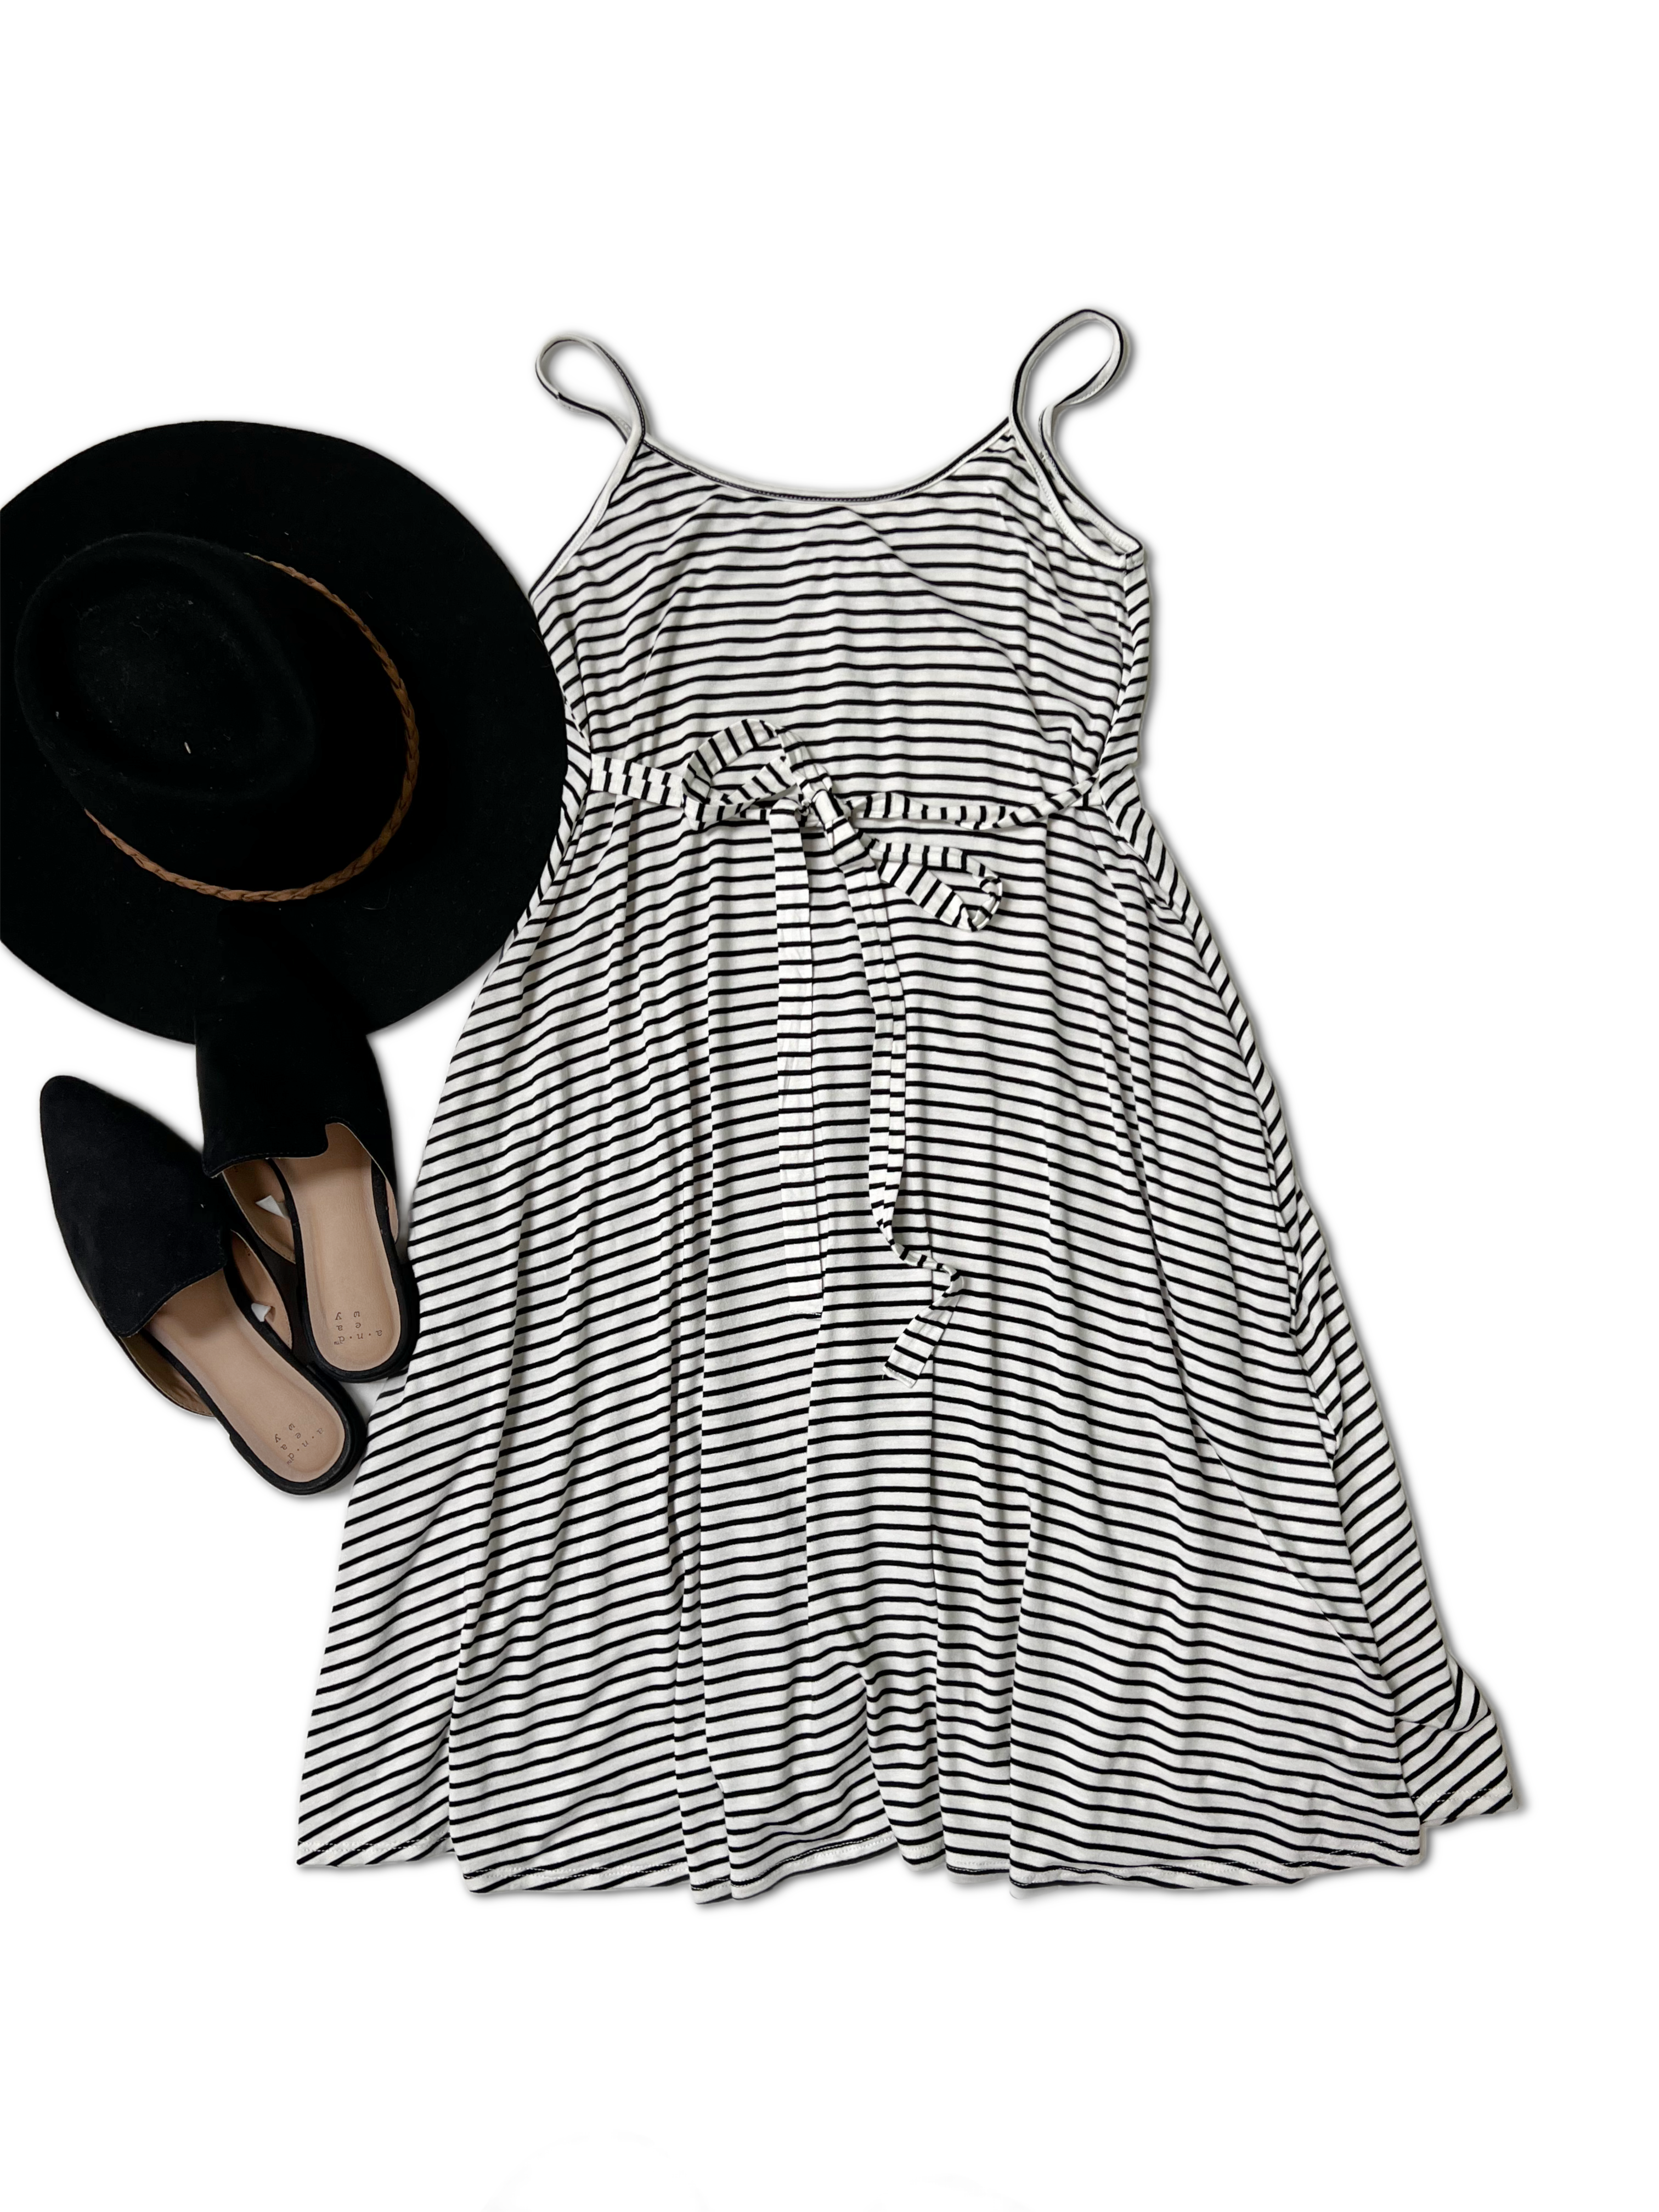 Pinstriped Perfection - Dress  Boutique Simplified   